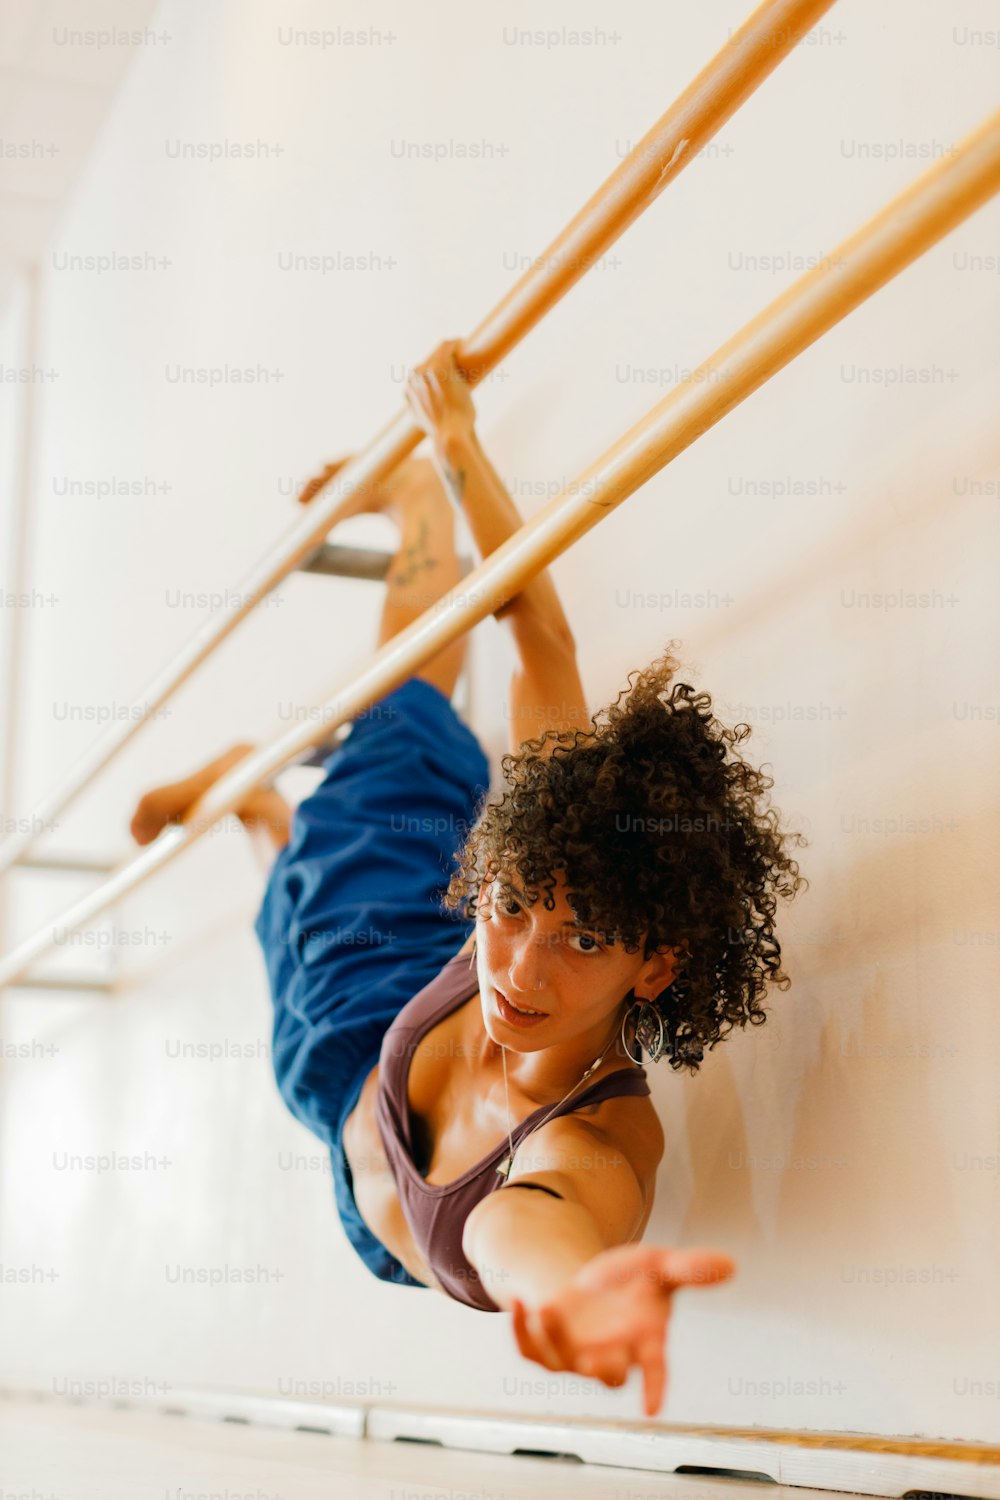 a woman hanging upside down on a pole